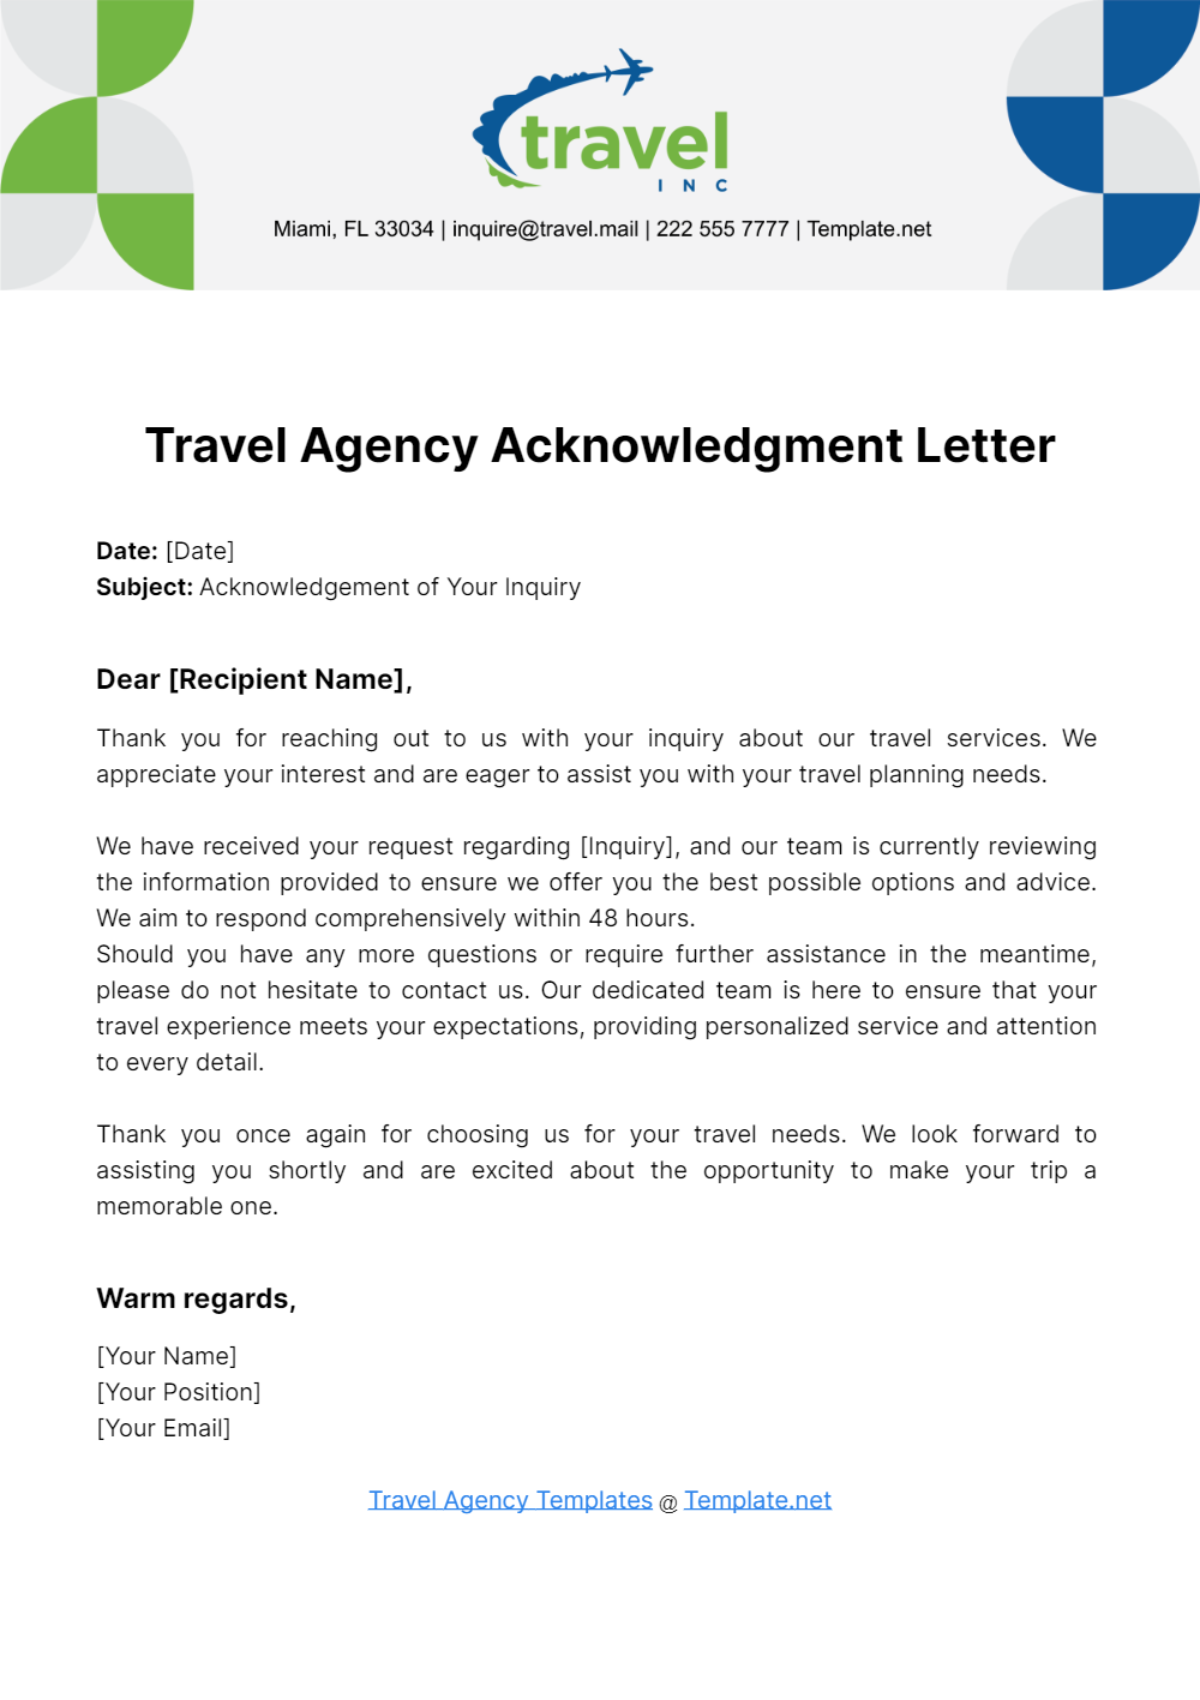 Travel Agency Acknowledgement Letter Template